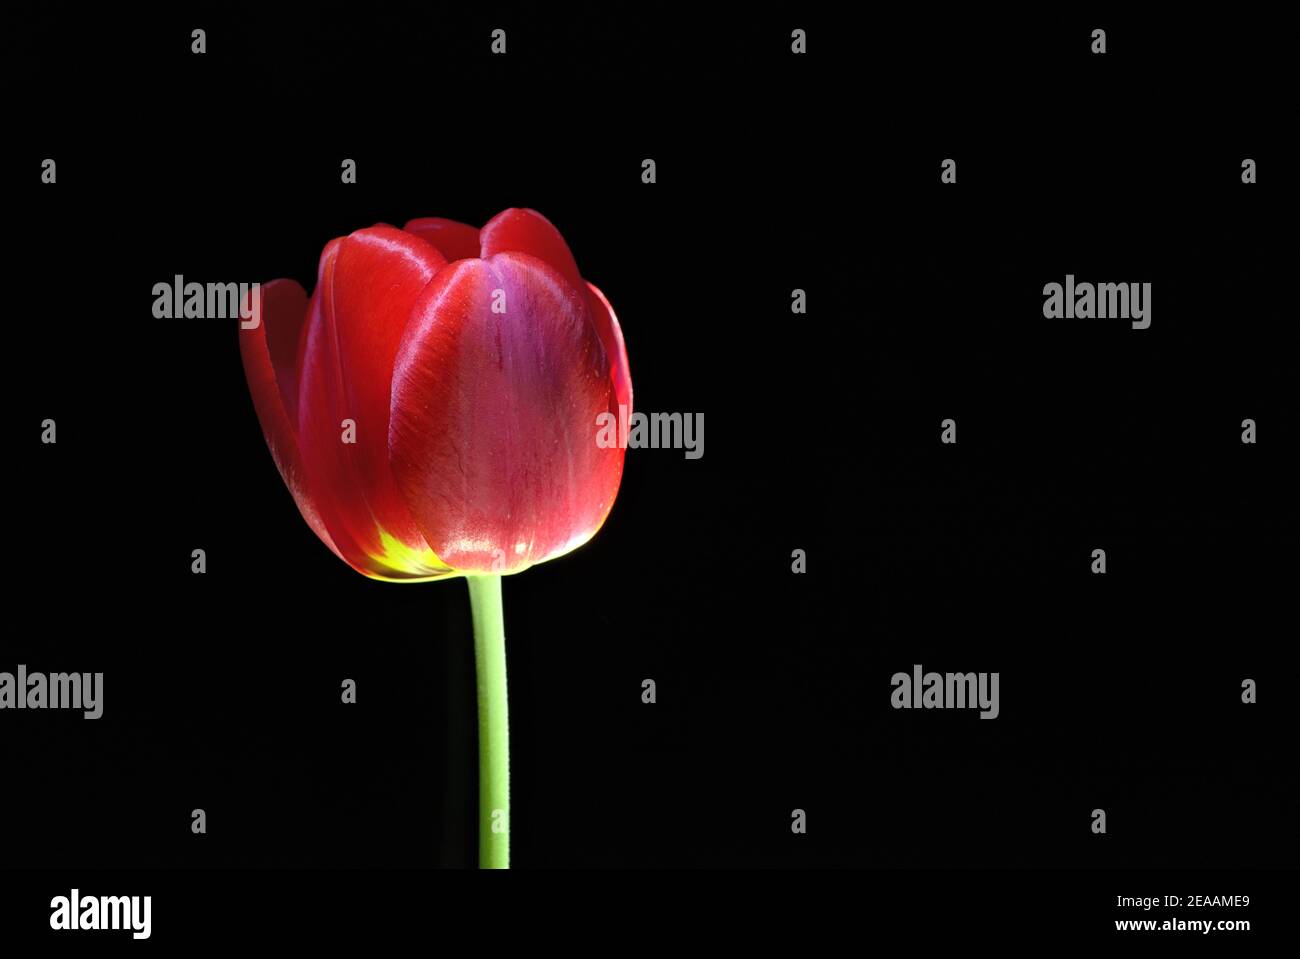 Isolated red tulip on black bacground, beauty in simplicity Stock Photo